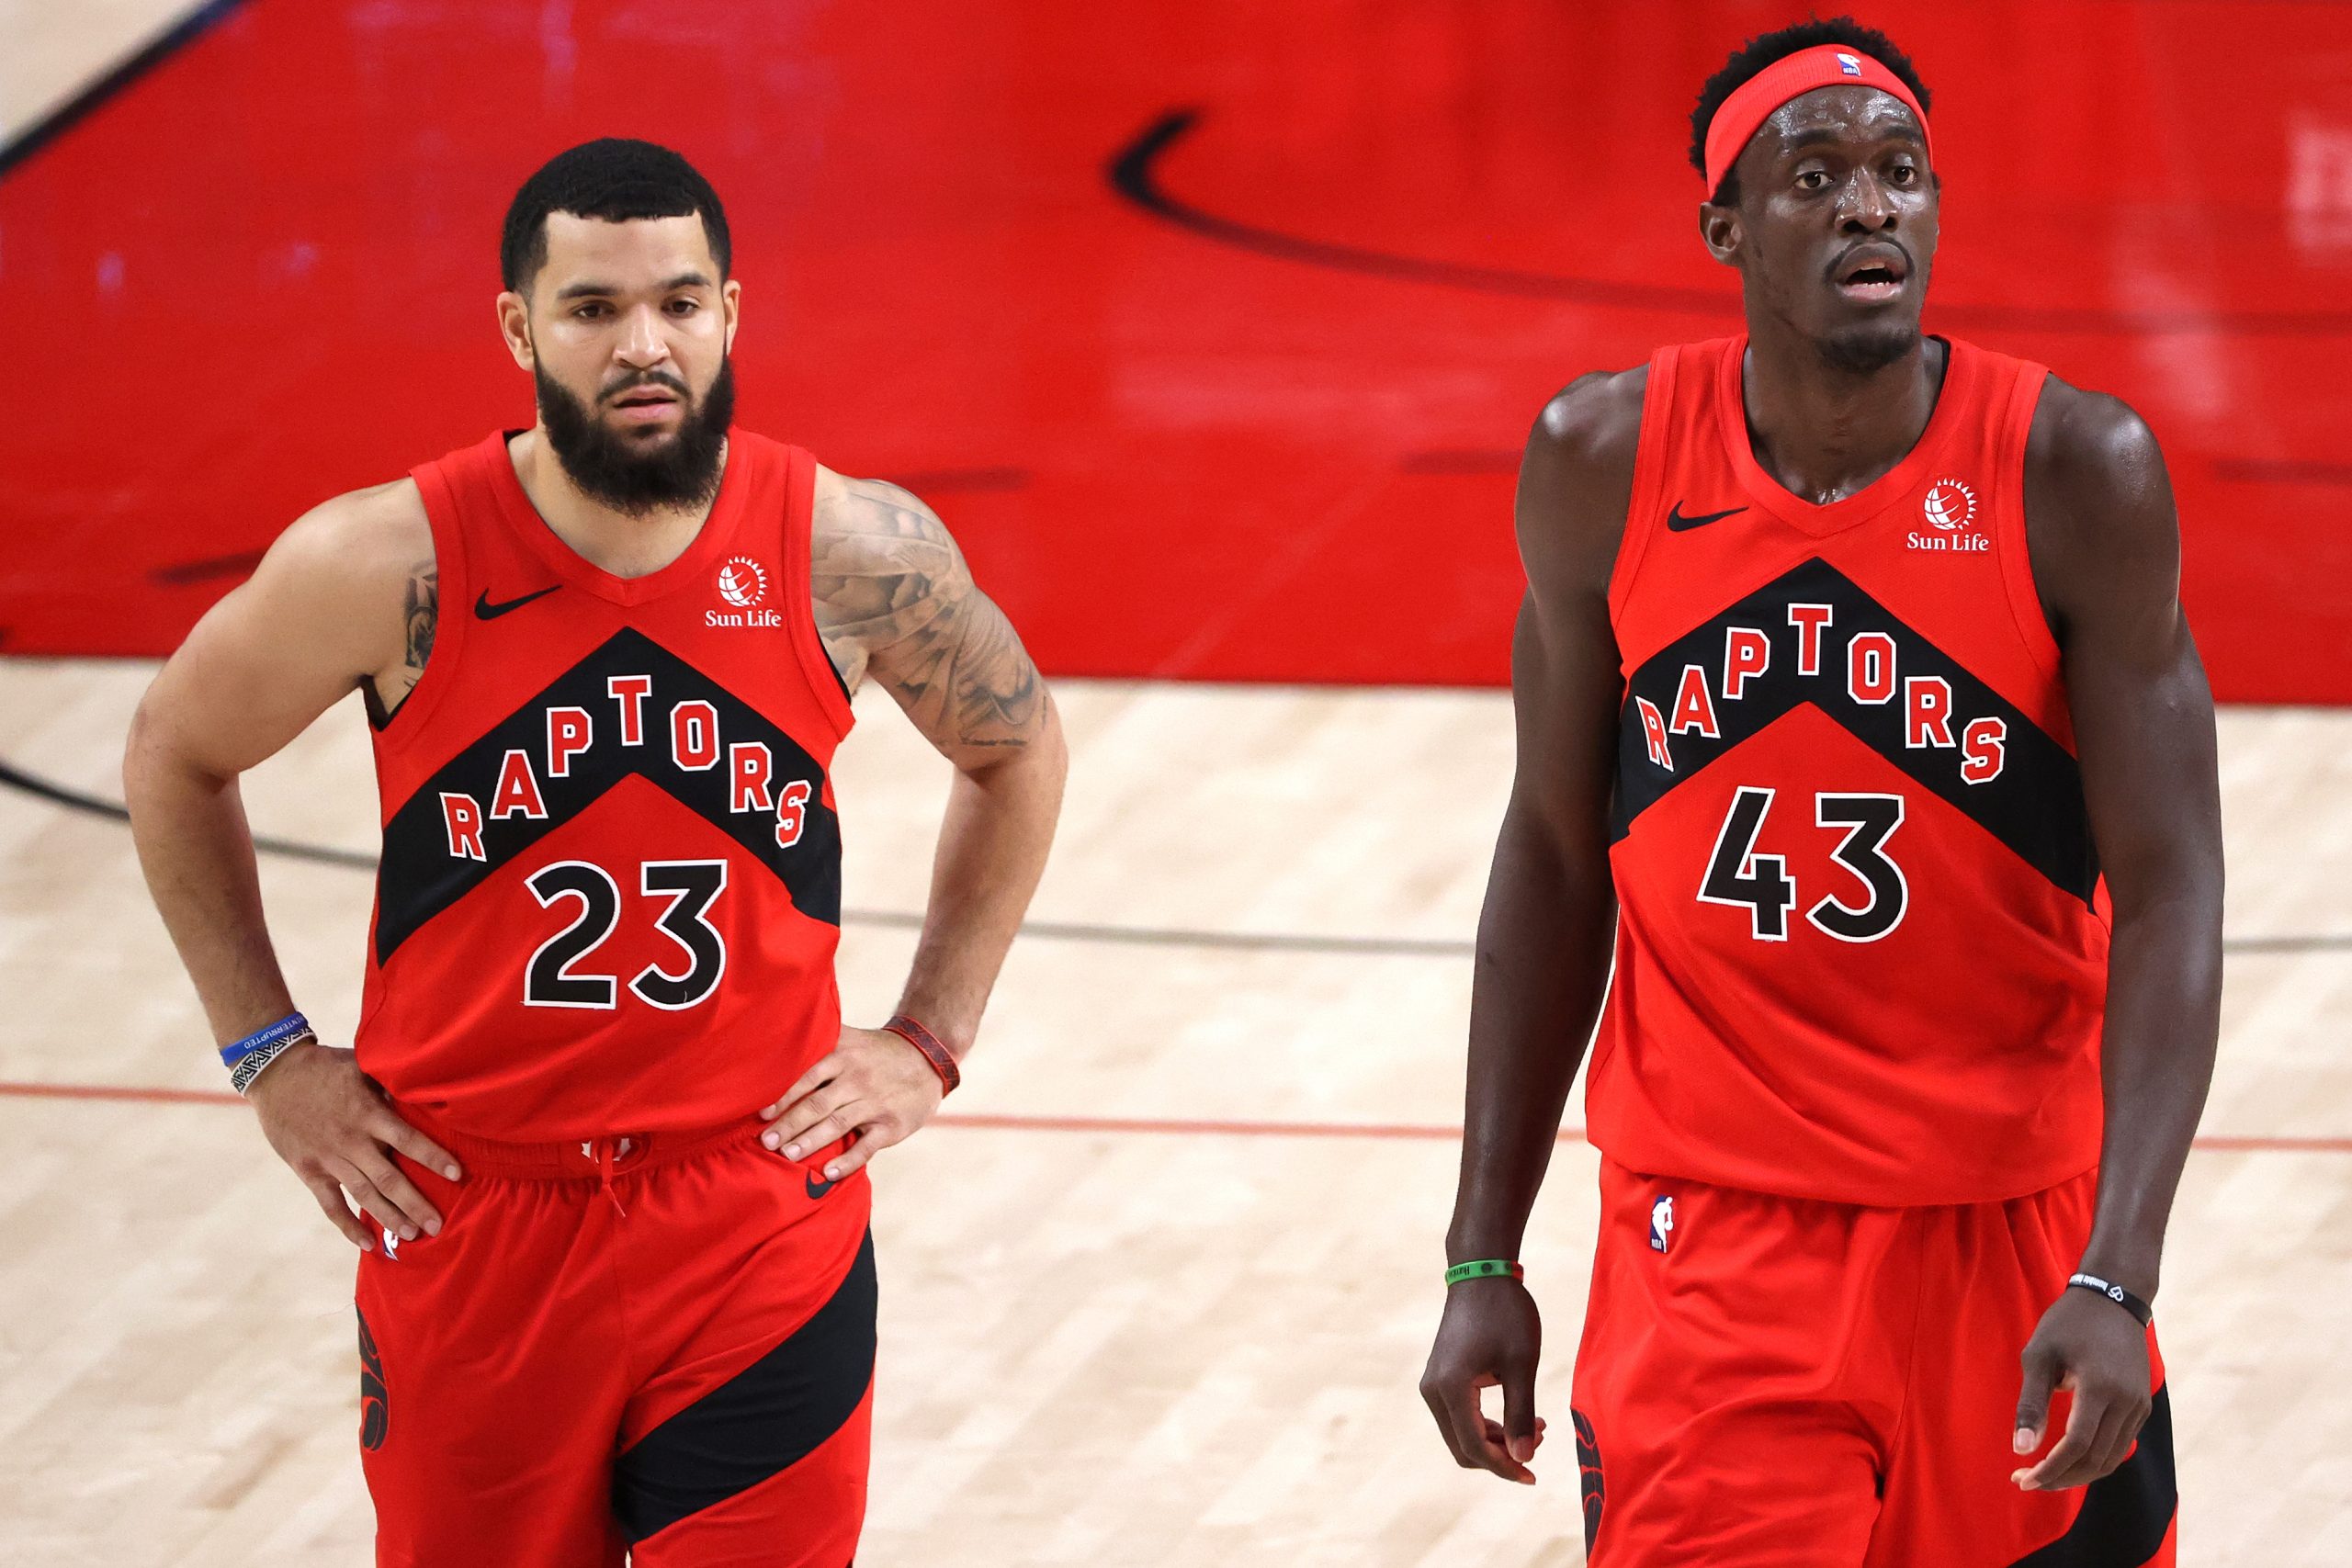 Toronto Raptors stars Fred VanVleet and Pascal Siakam rest during a break in the action in a recent game against the Portland Trail Blazers.